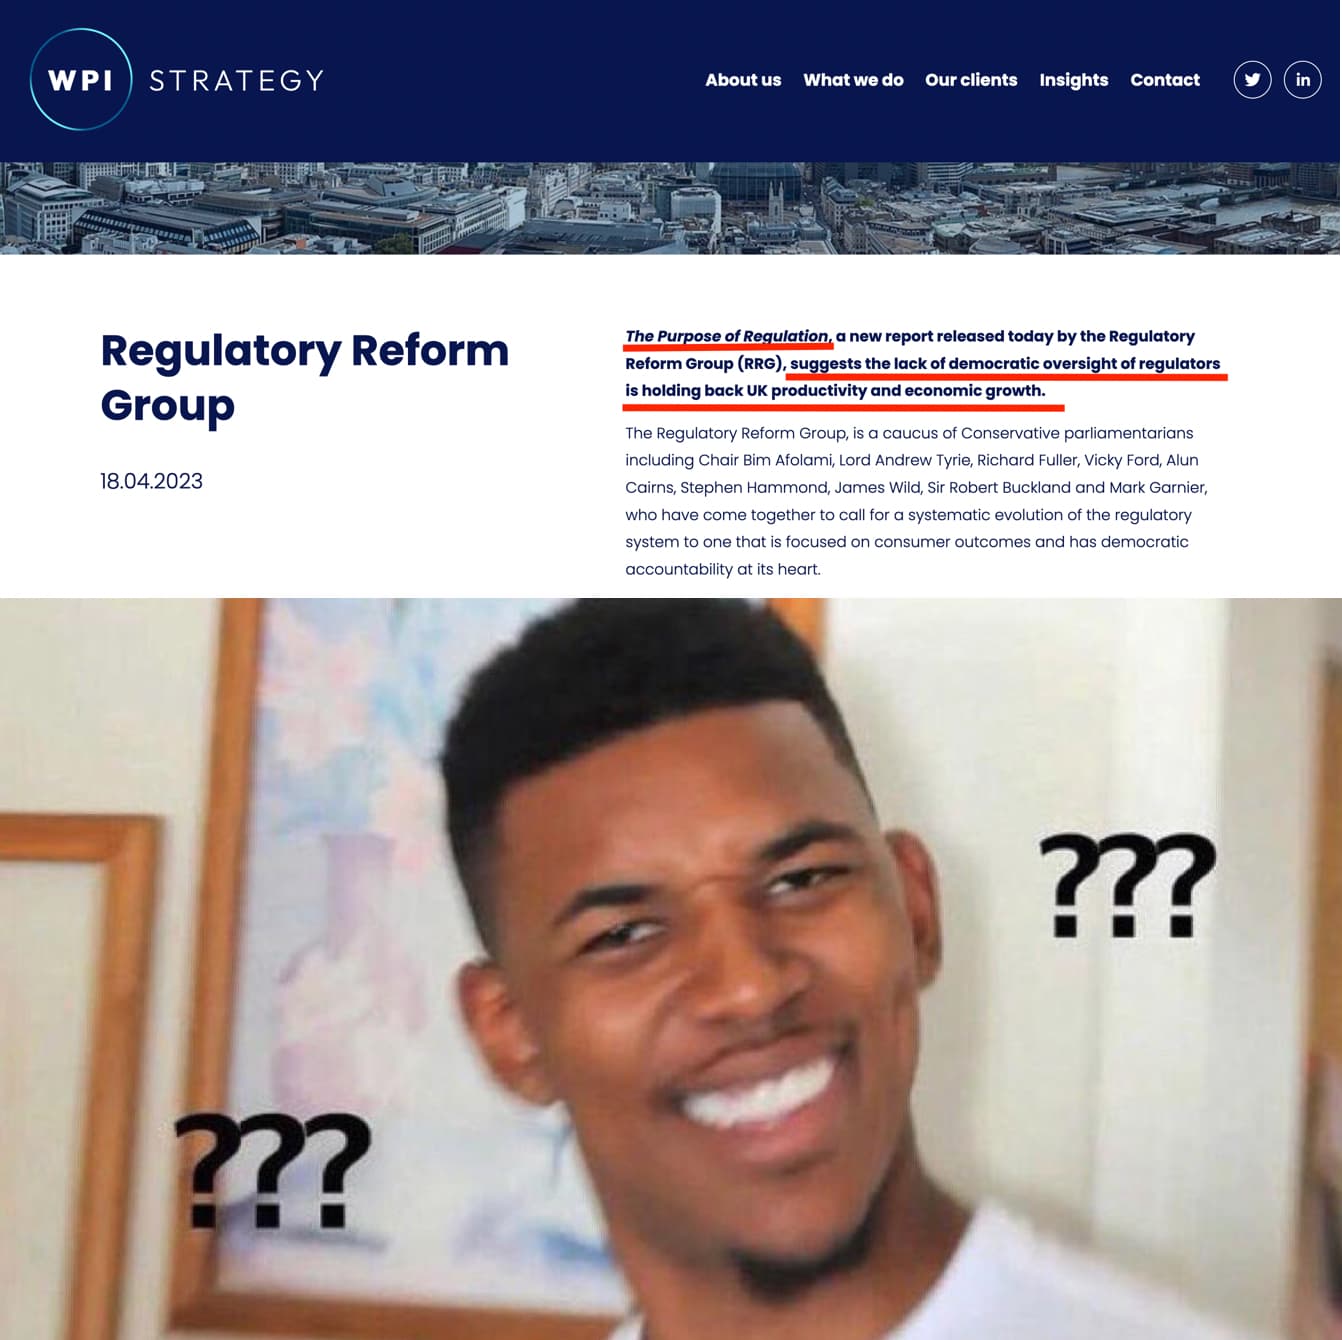 WPI STRATEGY'S REGULATORY REFORM GROUP'S "ABOUT US" PAGE ACCOMPANIED WITH A CONFUSED FACE.